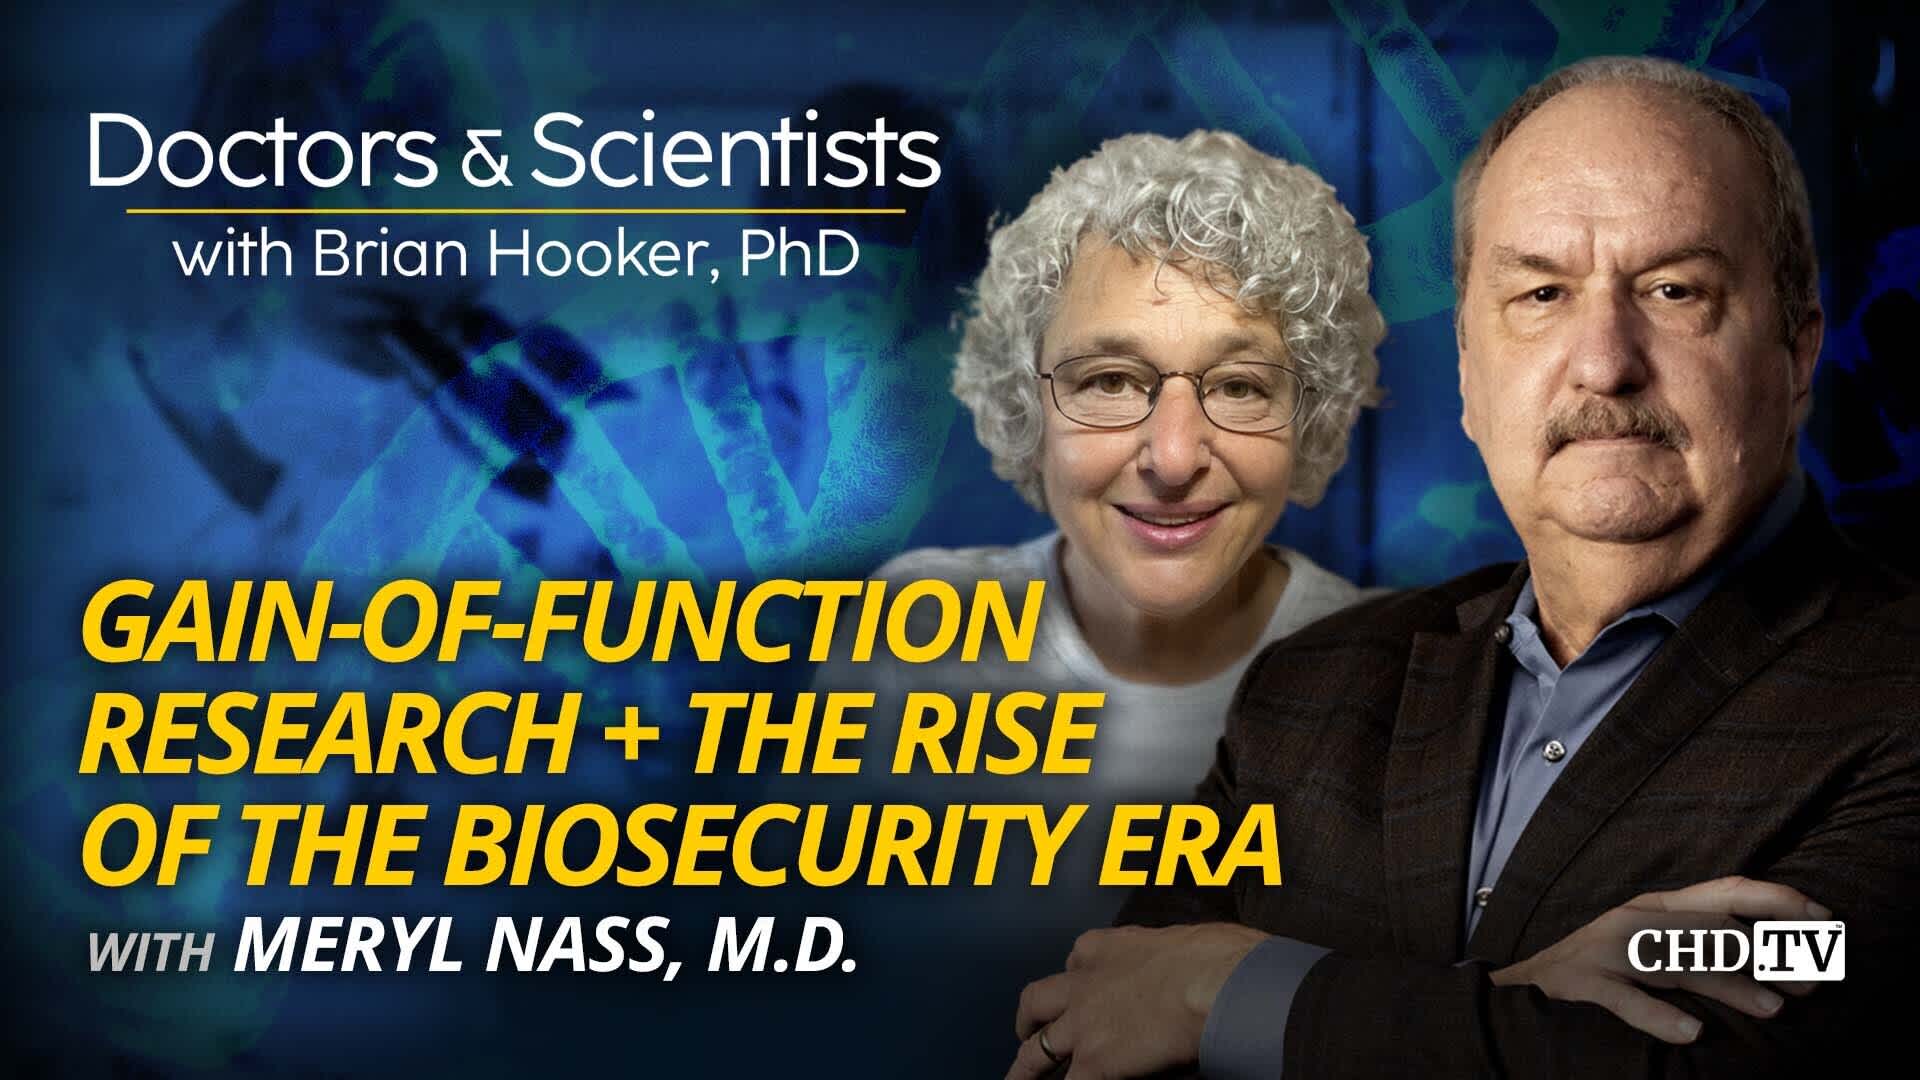 Gain-Of-Function Research + the Rise of the Biosecurity Era